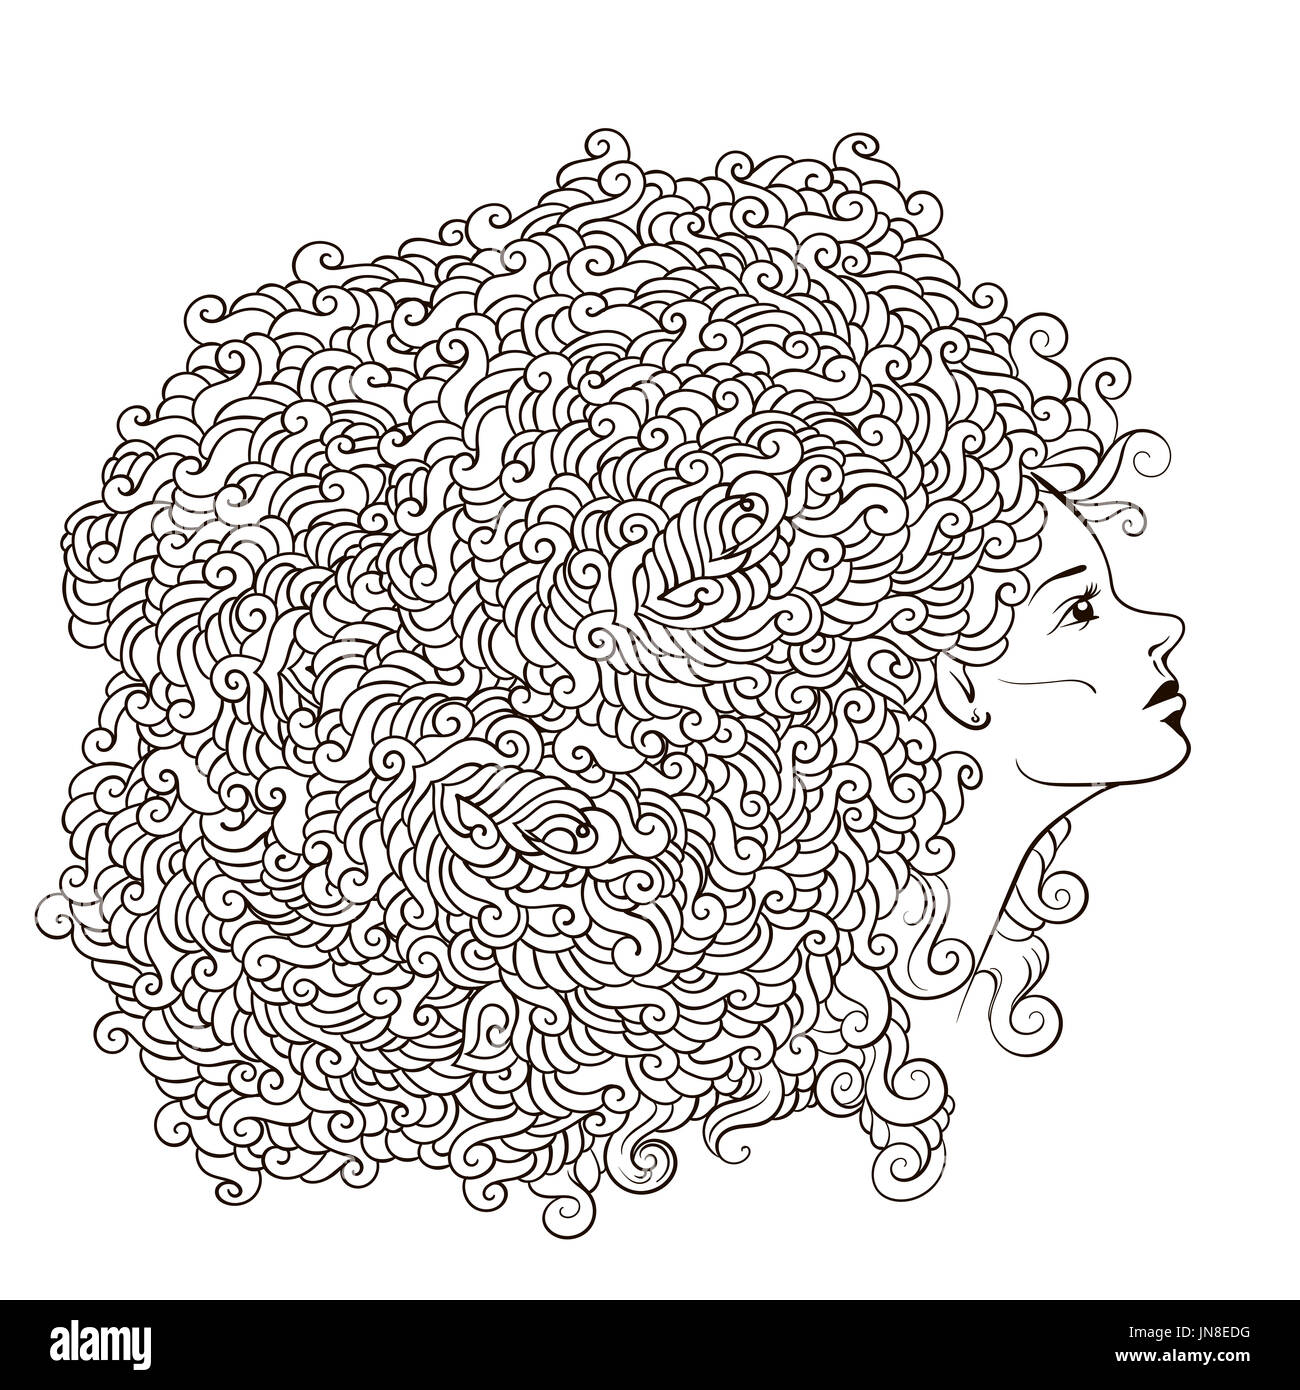 girl with abstract flower garland on the head. Uncolored contour pattern. Can be used as adult coloring book, card, invitation, t-shirt print. young p Stock Photo